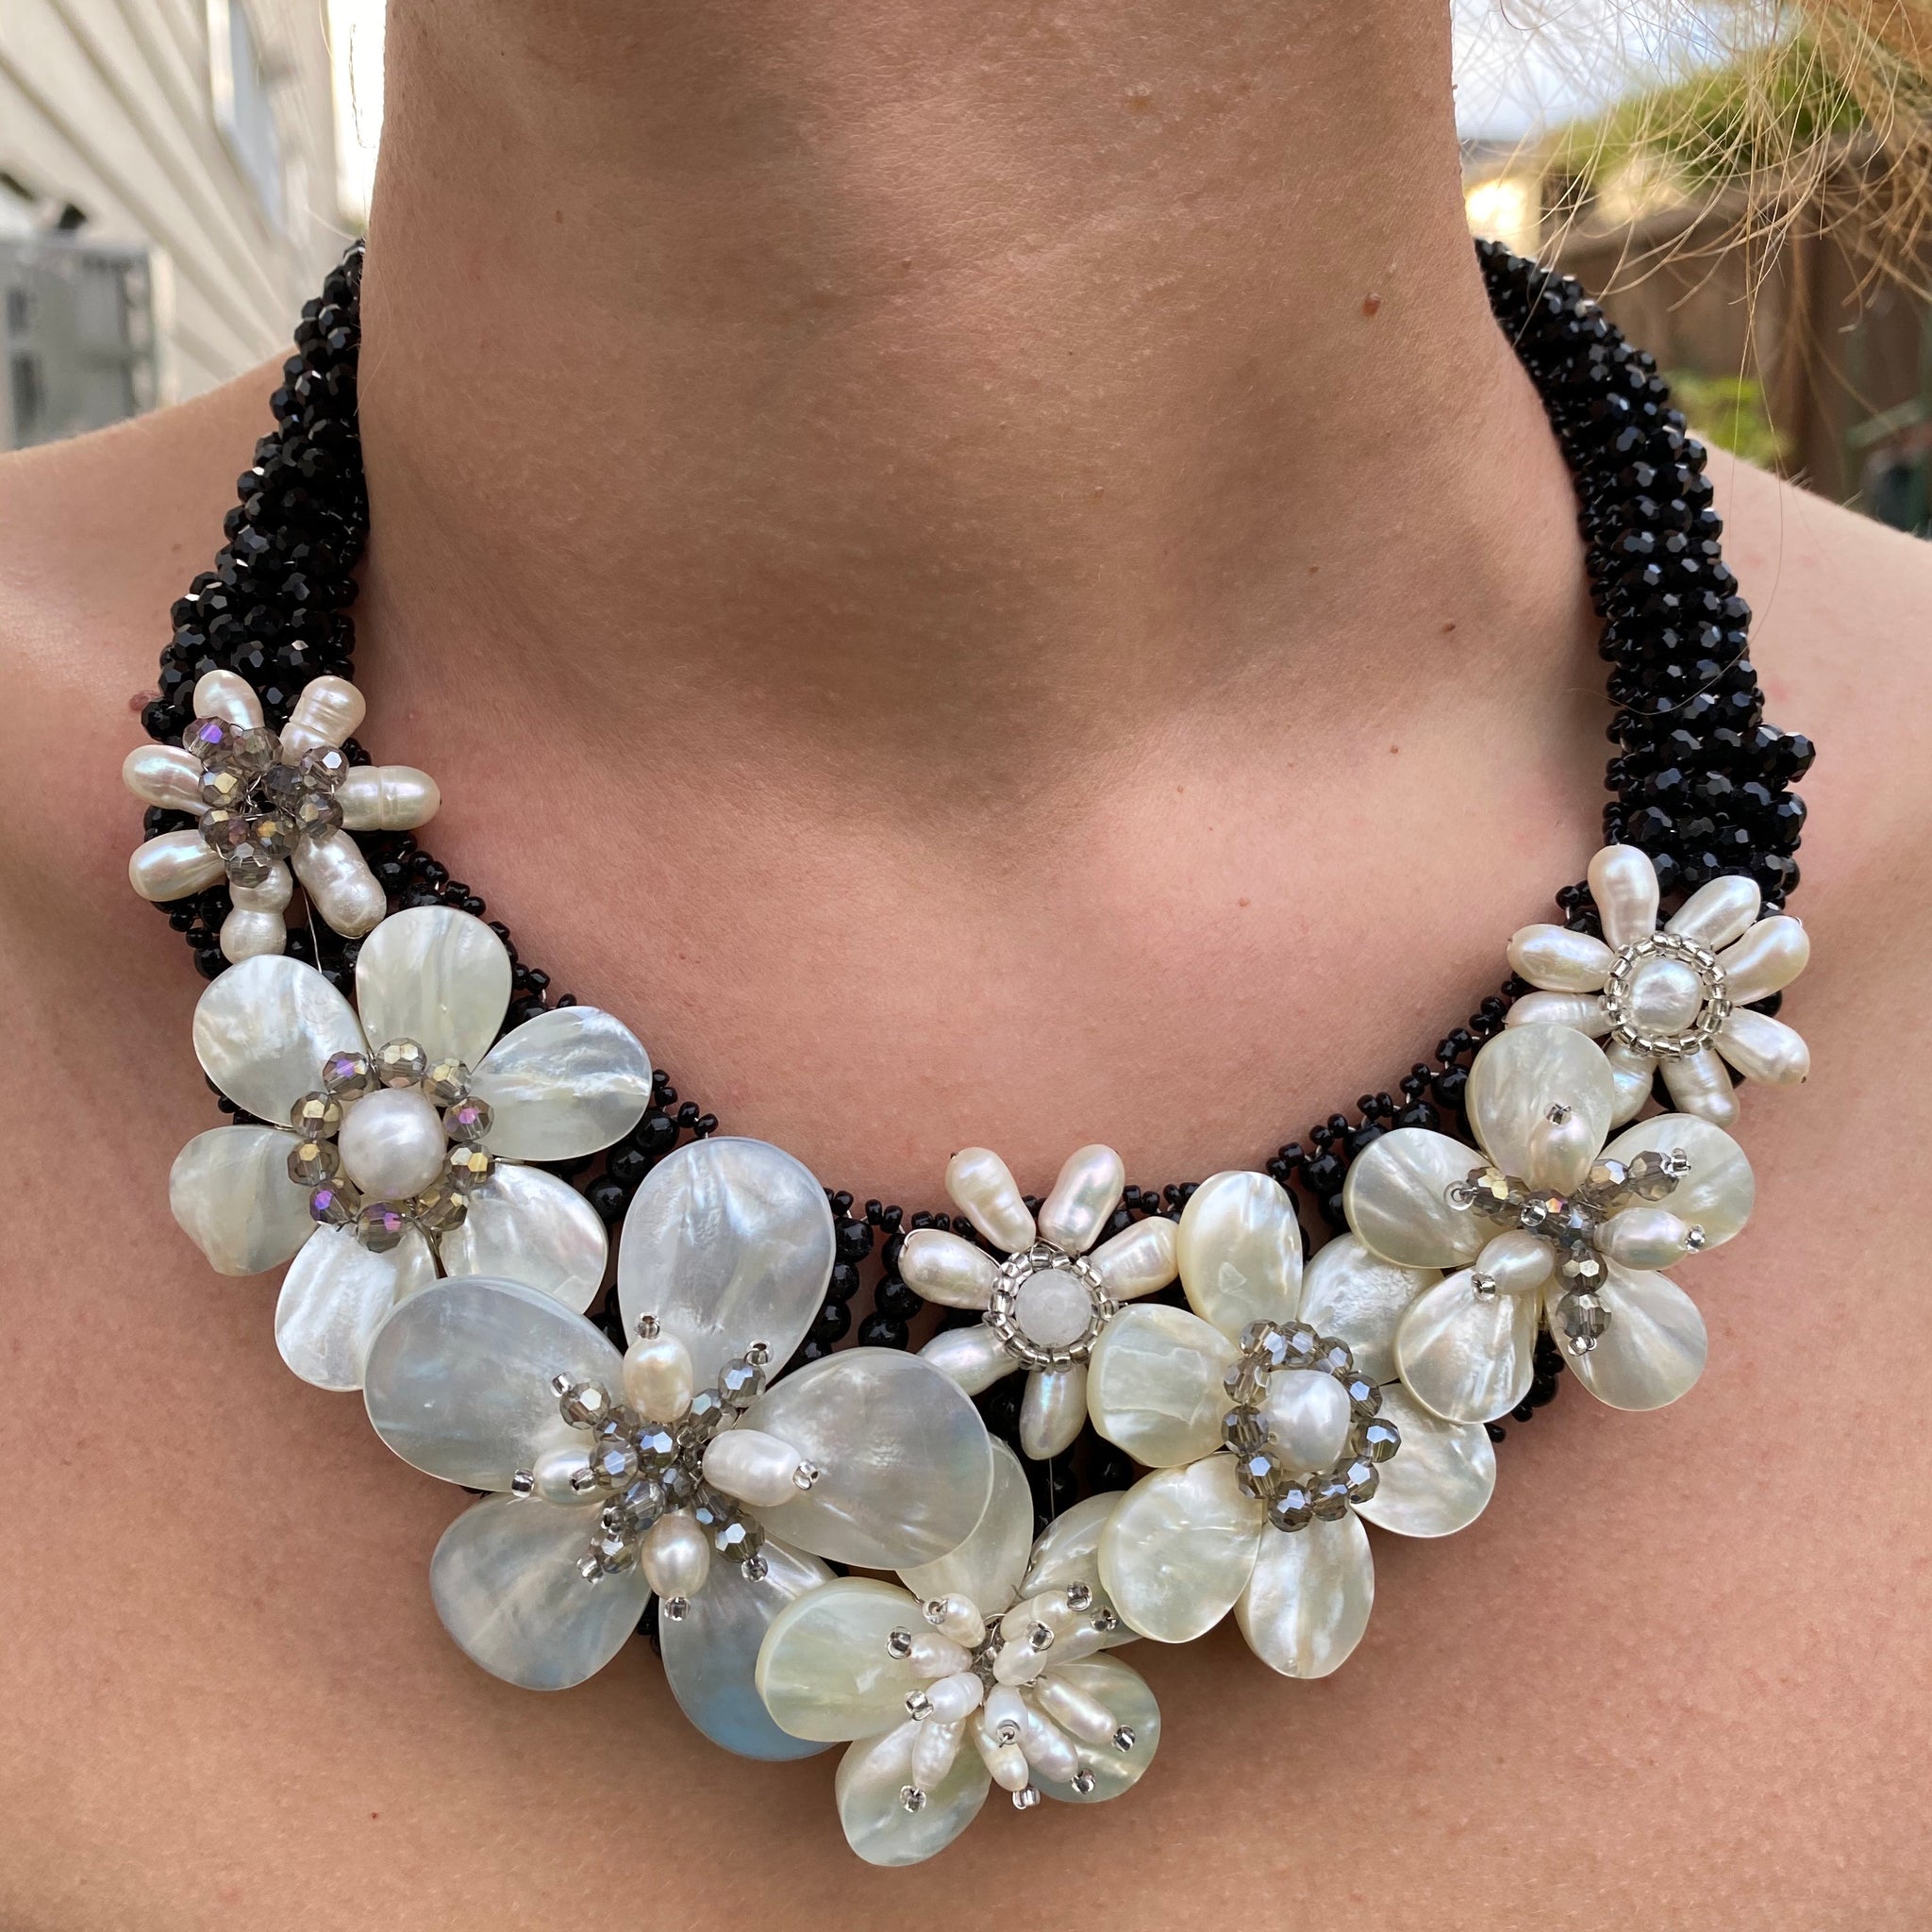 Handmade Stunning Necklace 20" Floral Mother of Pearl Shells with Black Onyx Bib Choker